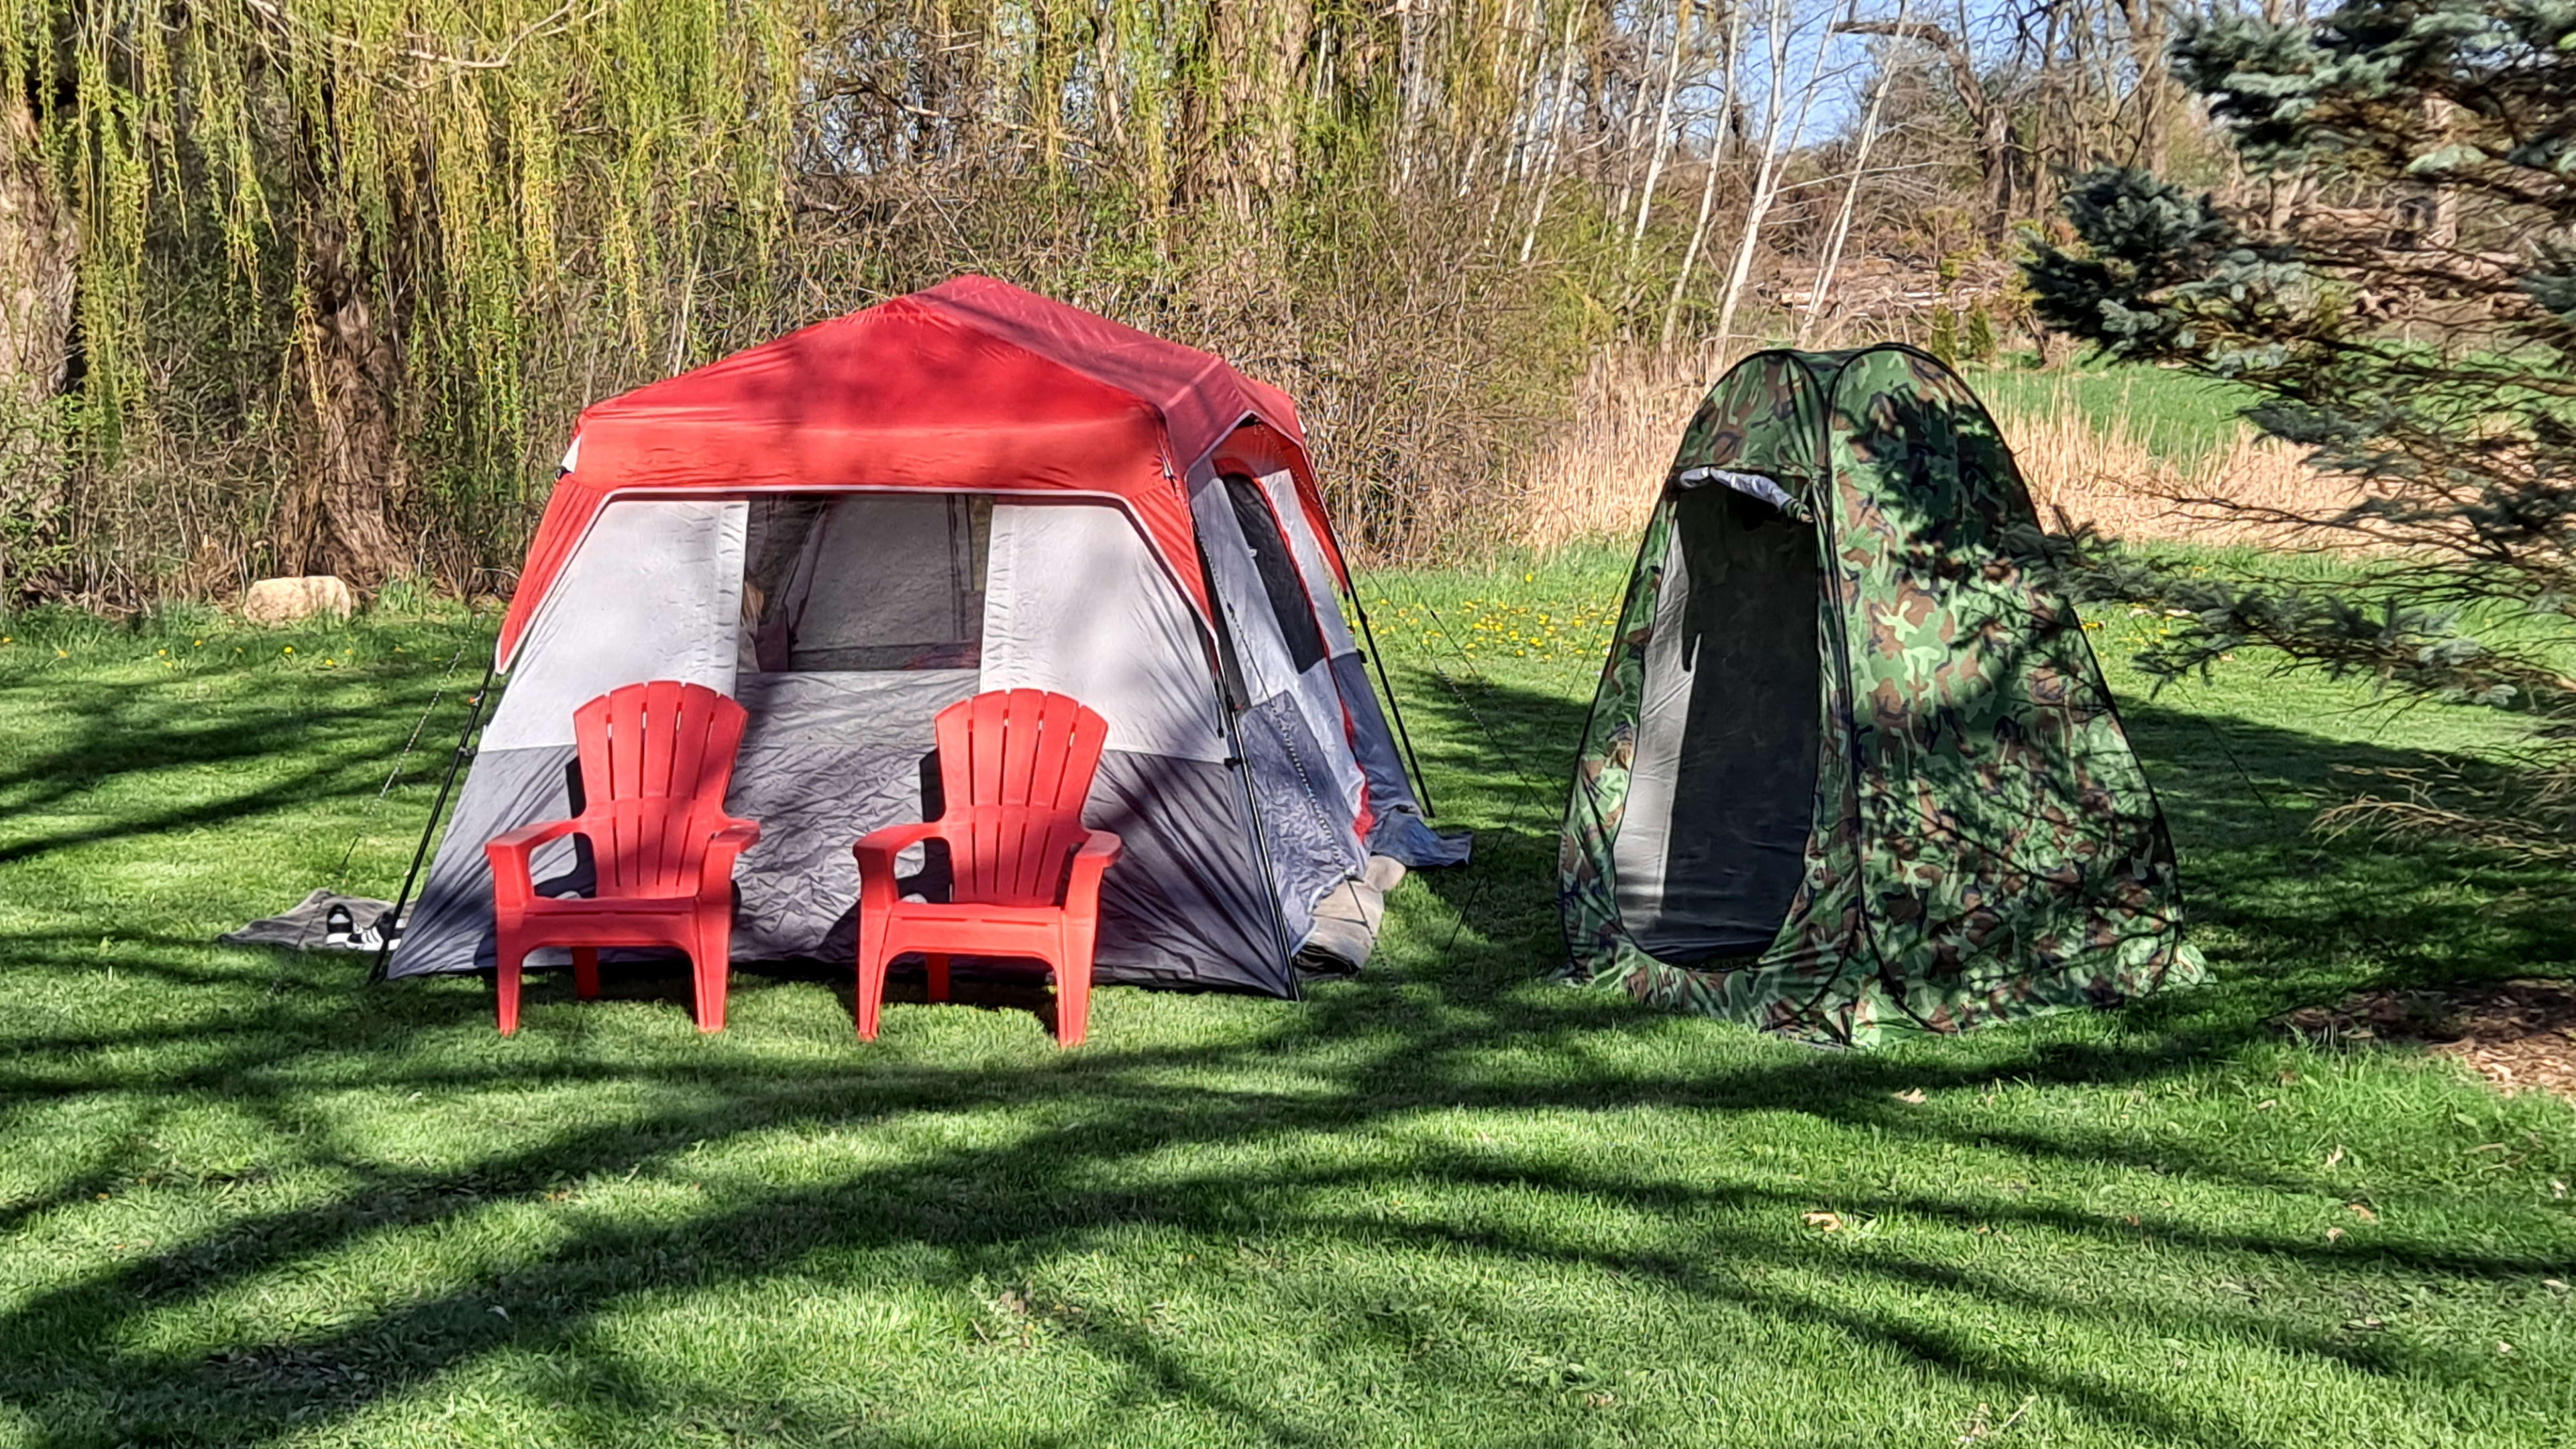 Campers can rent this tent complete with a queen bed and carpet 2 chairs, and private camp toilet for an added fee found in the extras. 